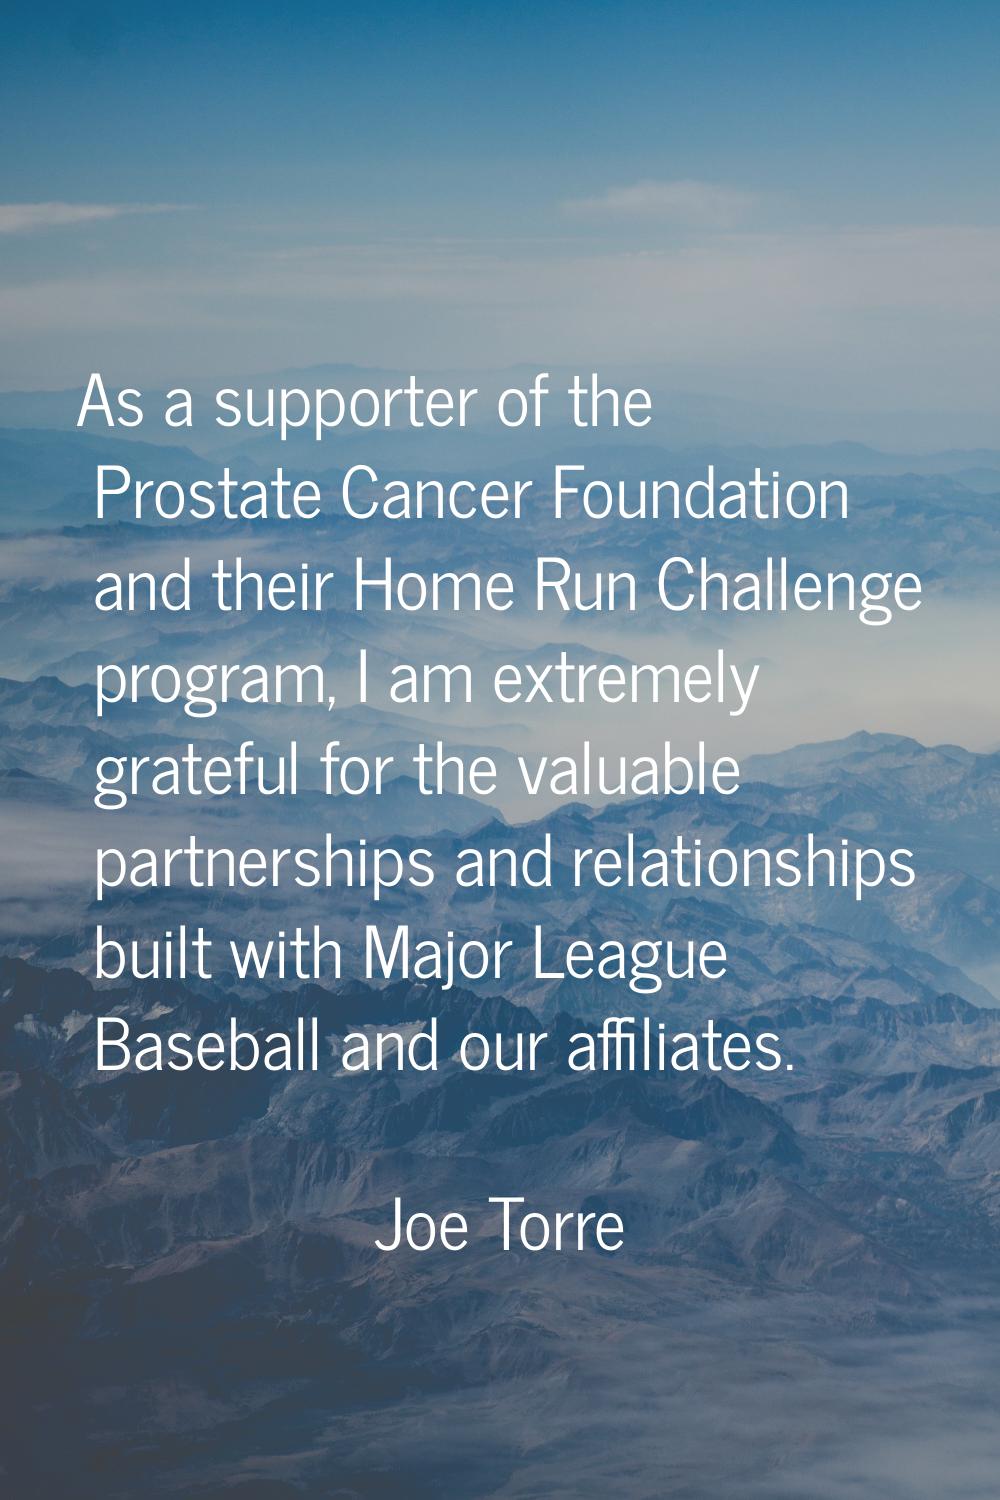 As a supporter of the Prostate Cancer Foundation and their Home Run Challenge program, I am extreme